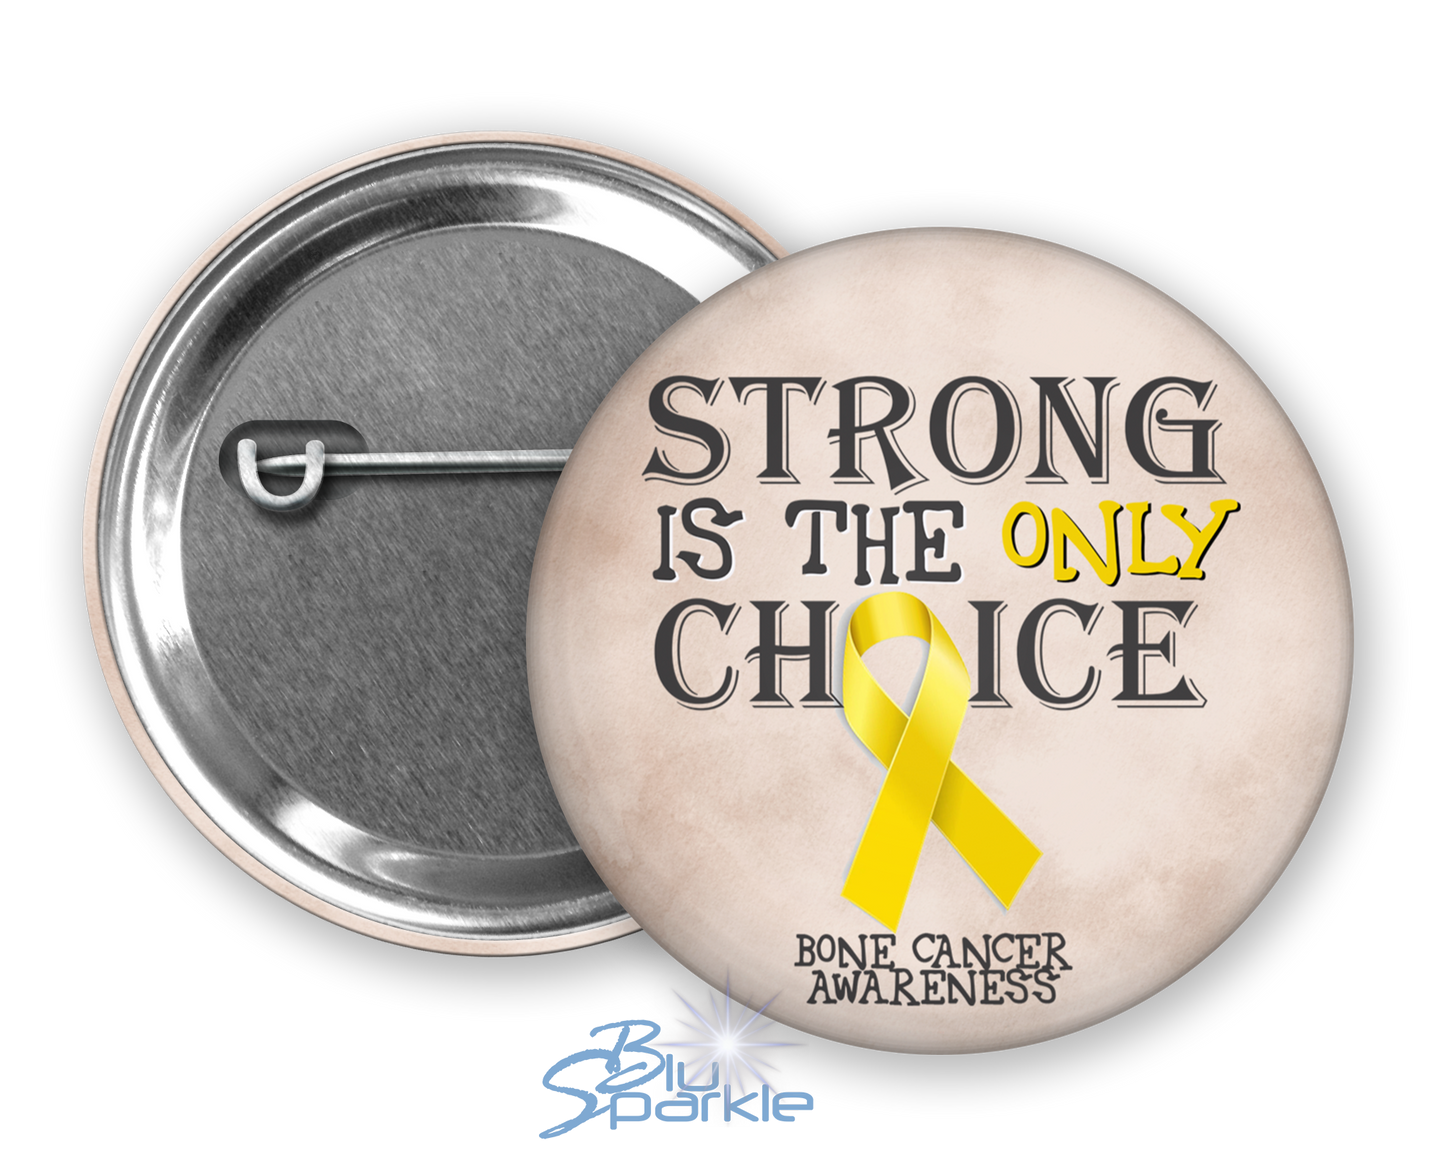 Strong is the Only Choice -Bone Cancer Awareness Pinback Button |x|